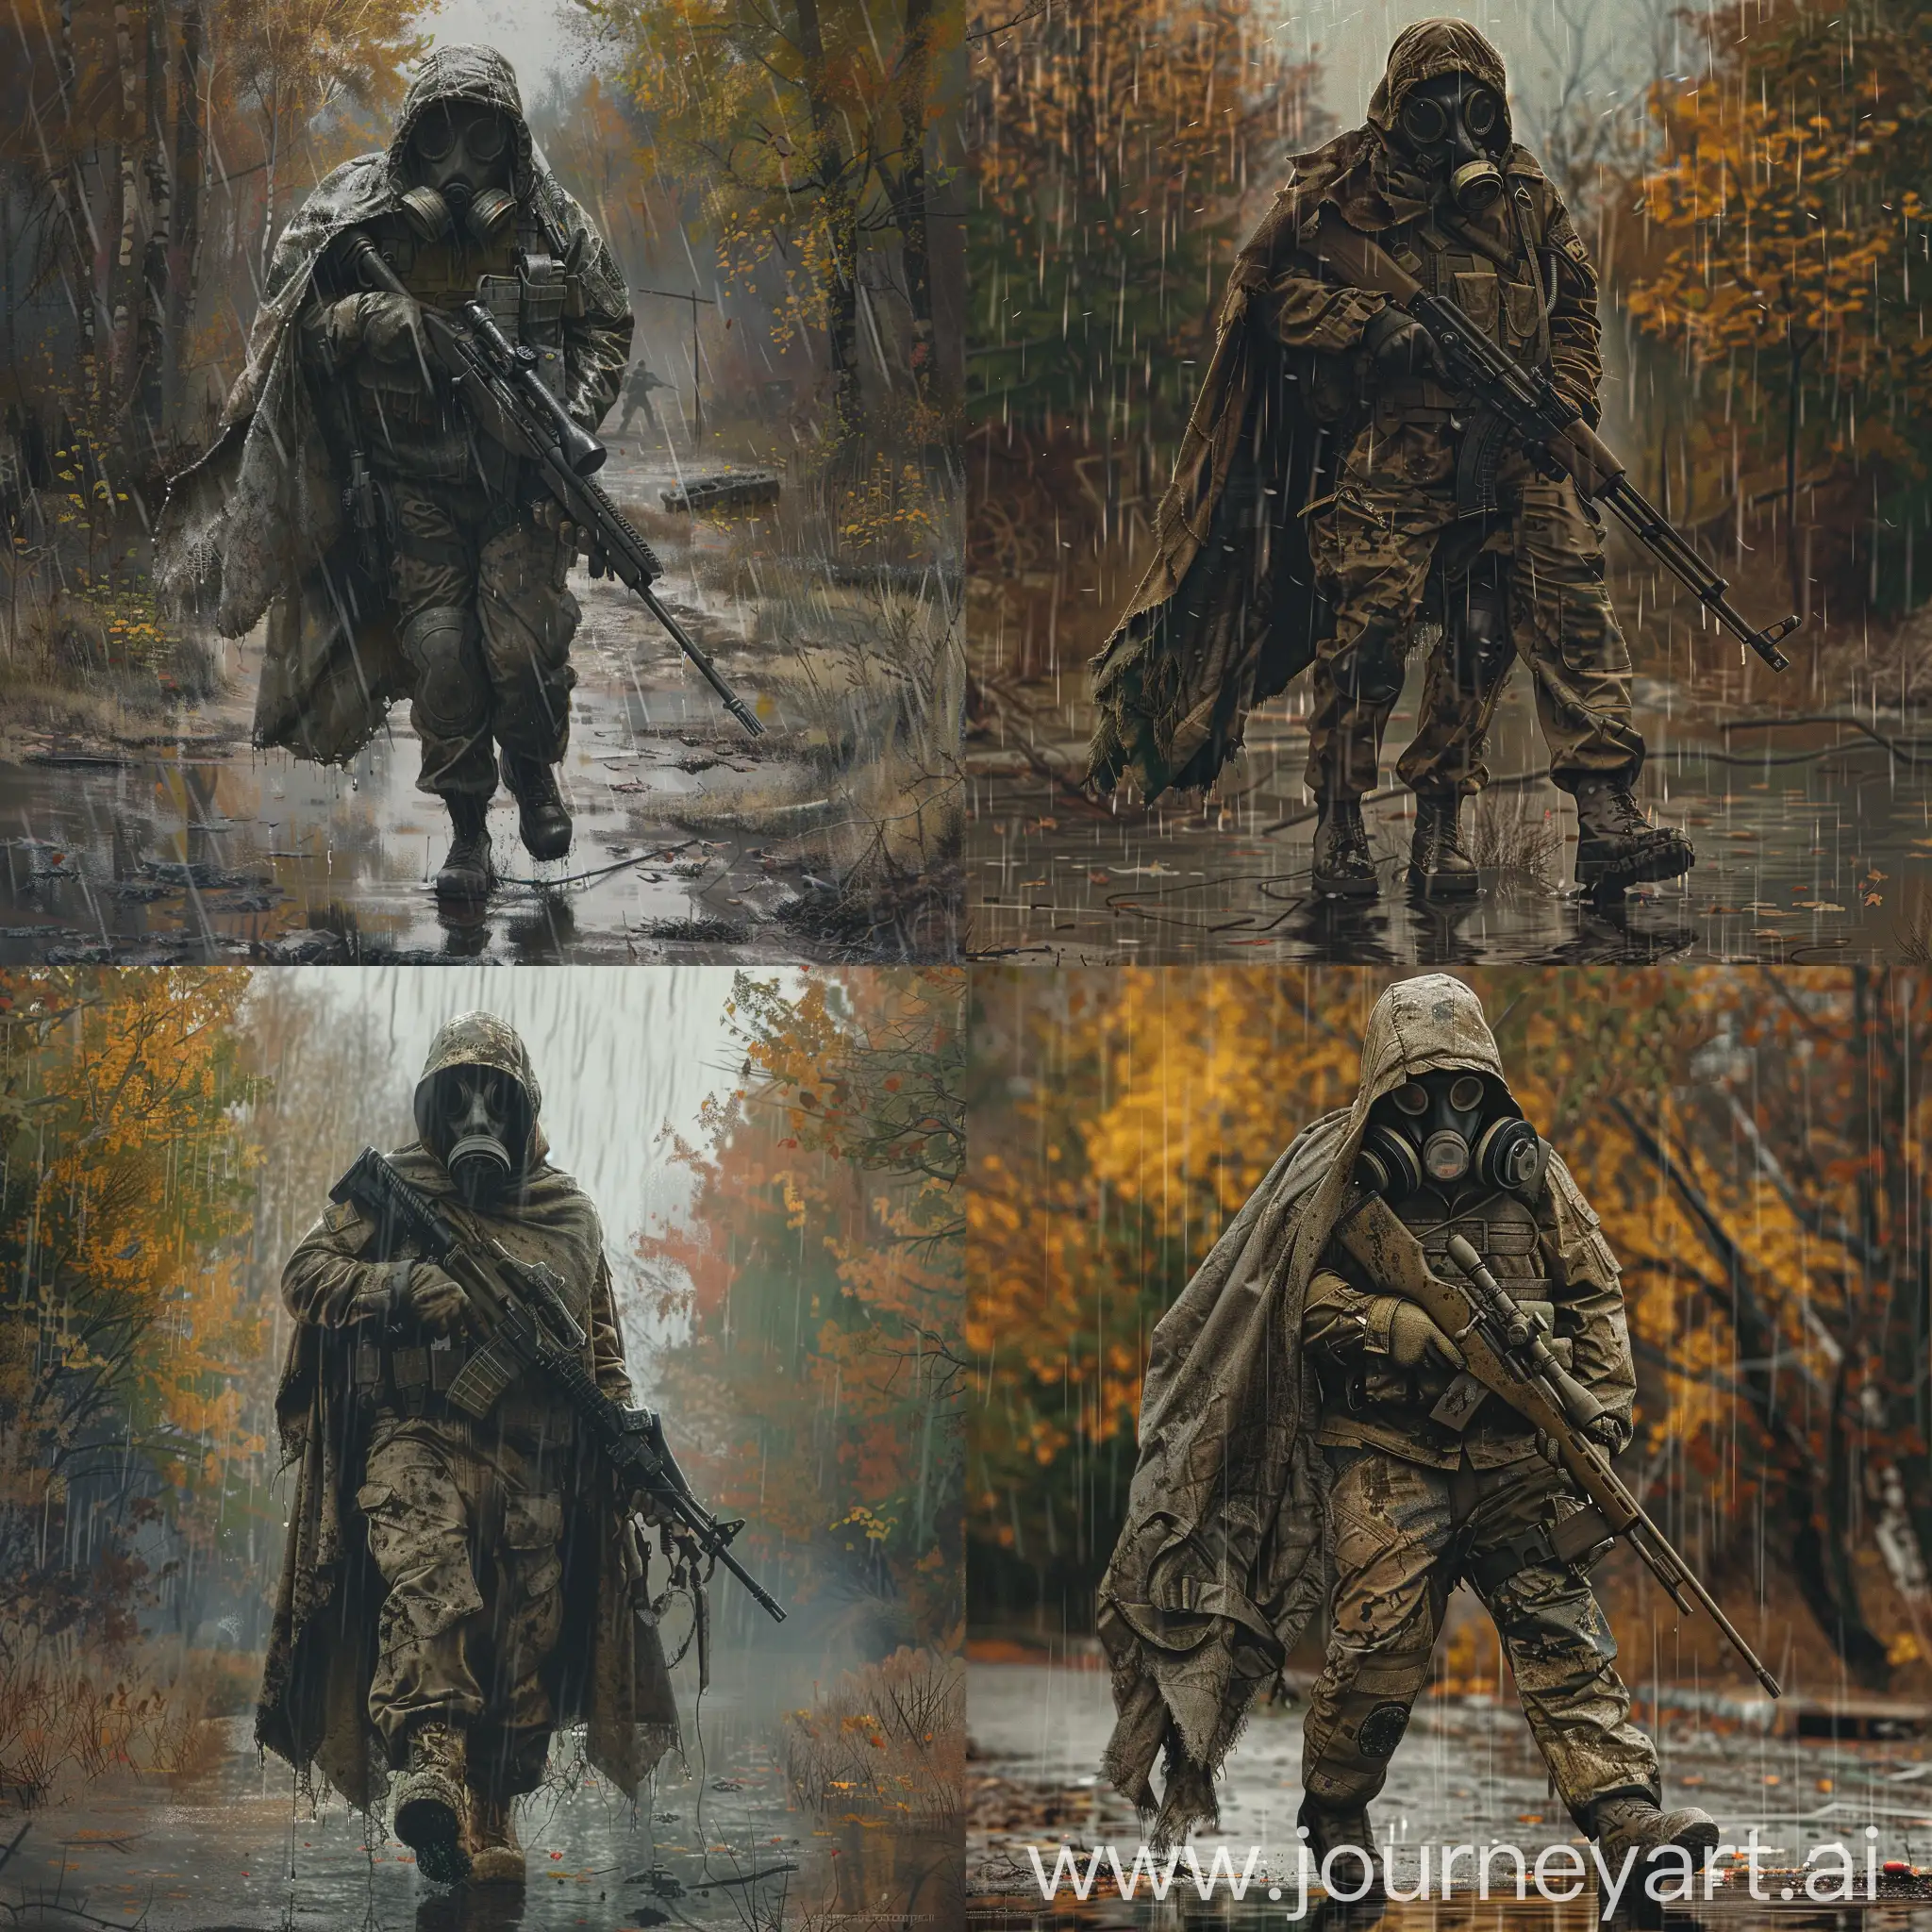 Chernobyl-Stalker-in-Military-Jumpsuit-with-Sniper-Rifle